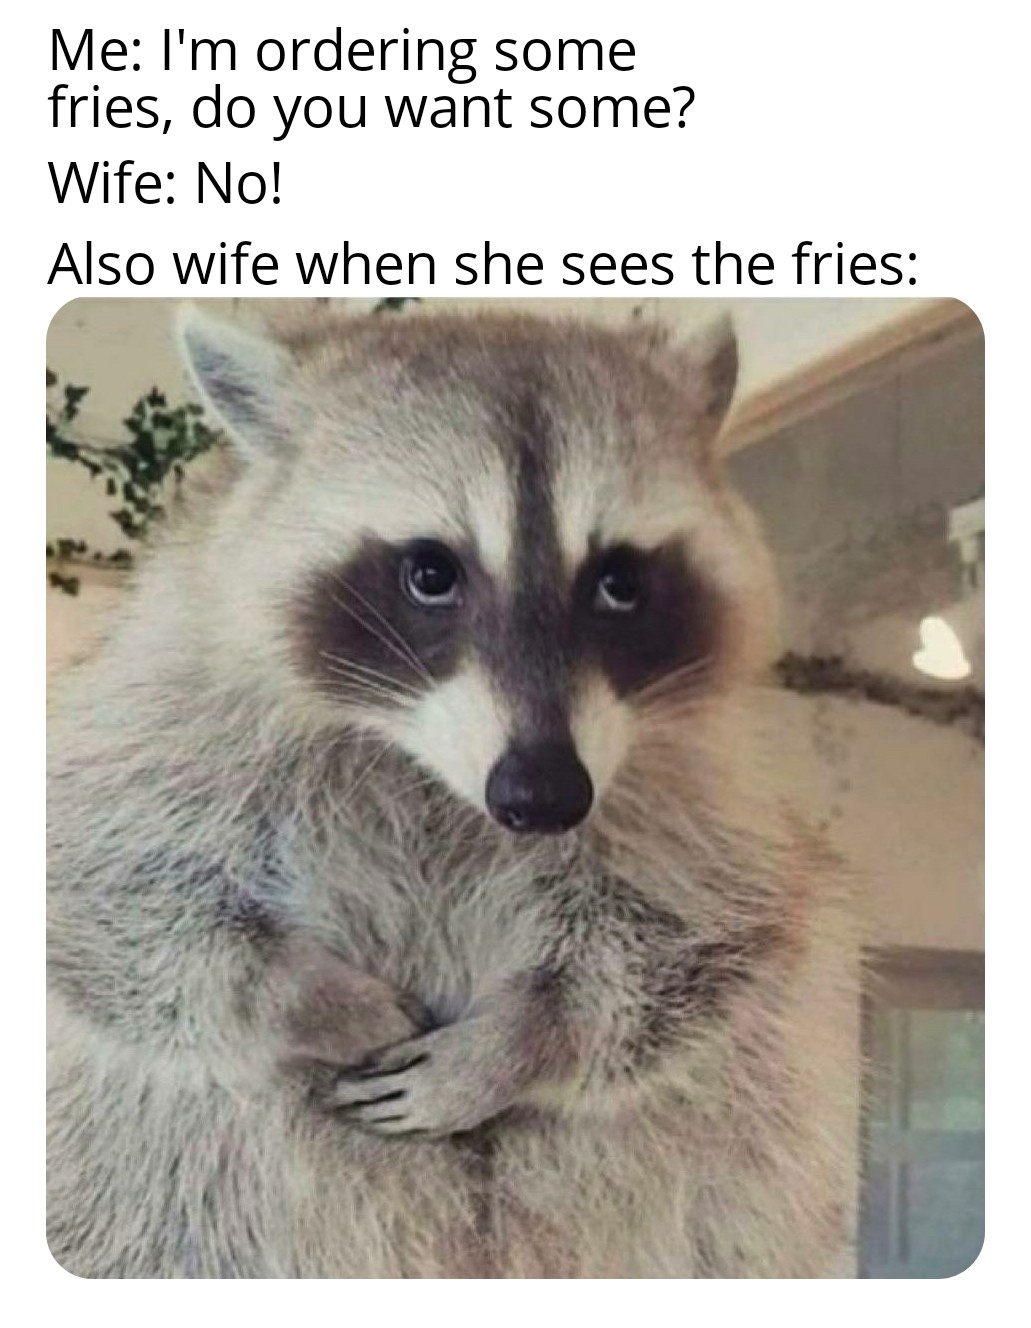 guilty raccoon - Me I'm ordering some fries, do you want some? Wife No! Also wife when she sees the fries